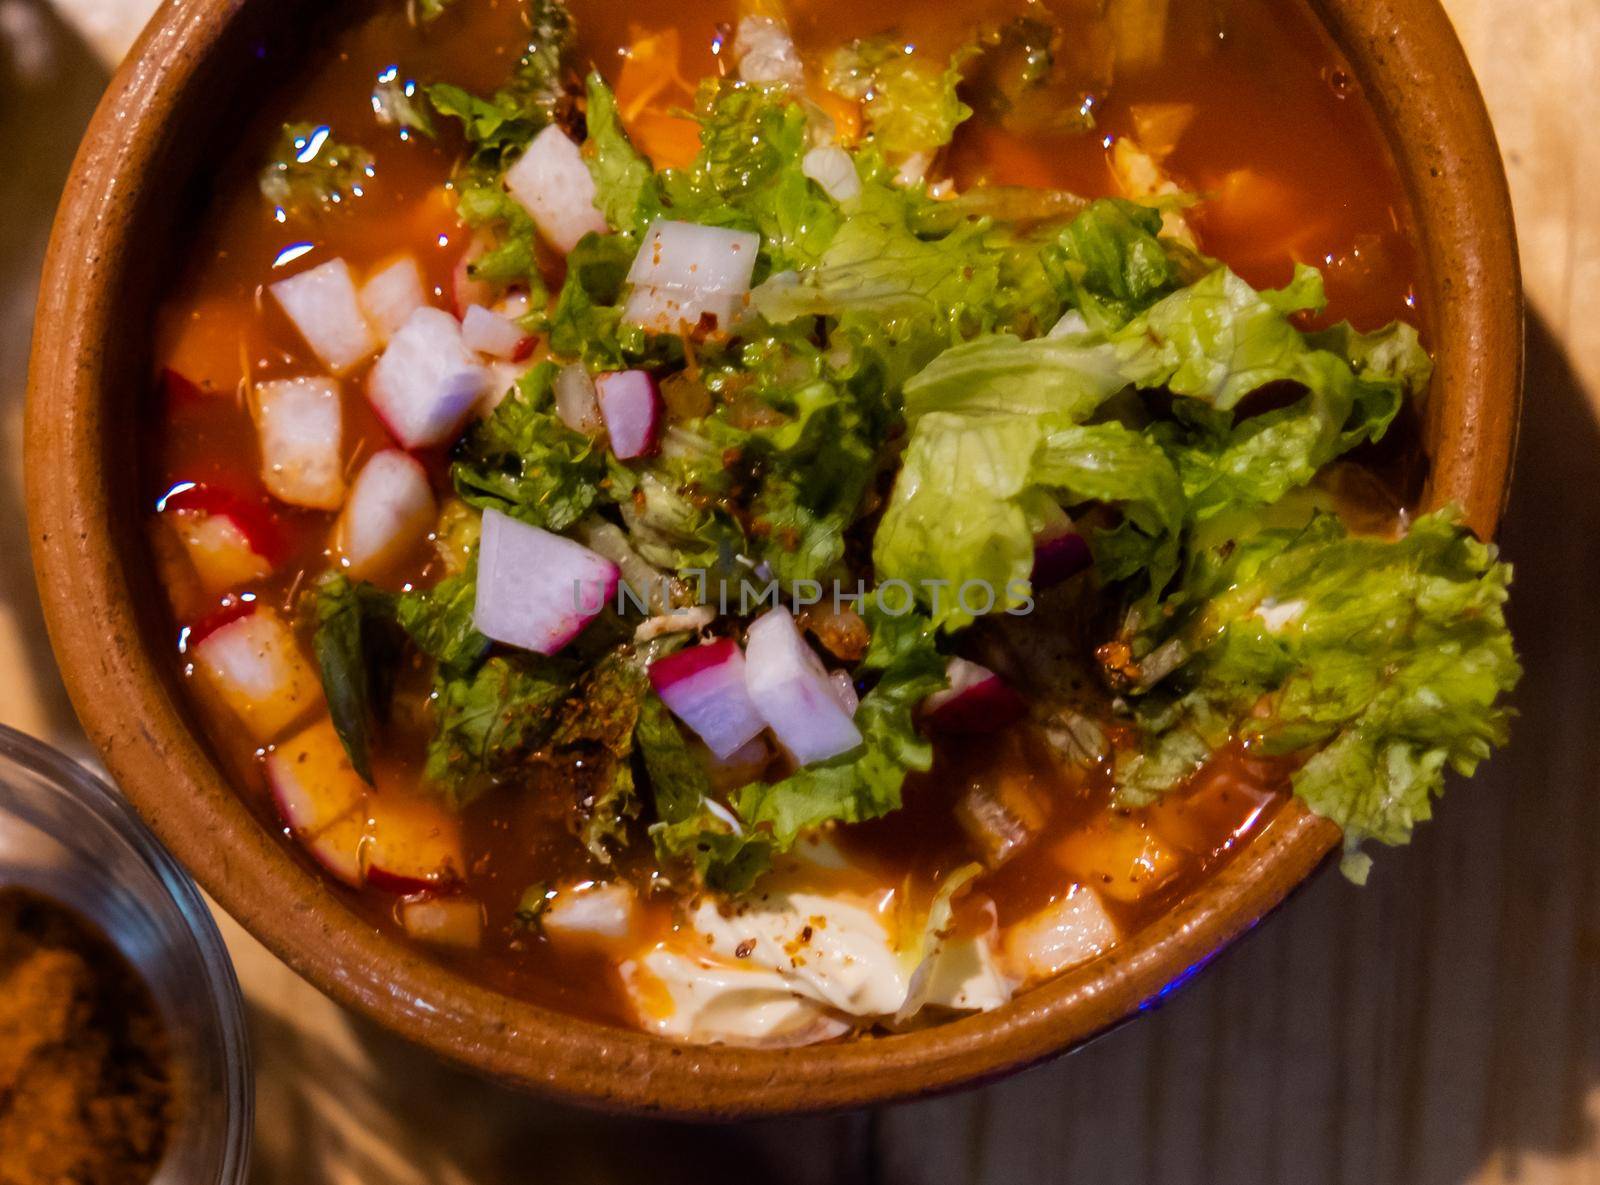 Top view of clay bowl of delicious and traditional red pozole on wooden table. Authentic Hispanic pork stew in handmade bowl with chopped radish and lettuce on top. Traditional Mexican cuisine